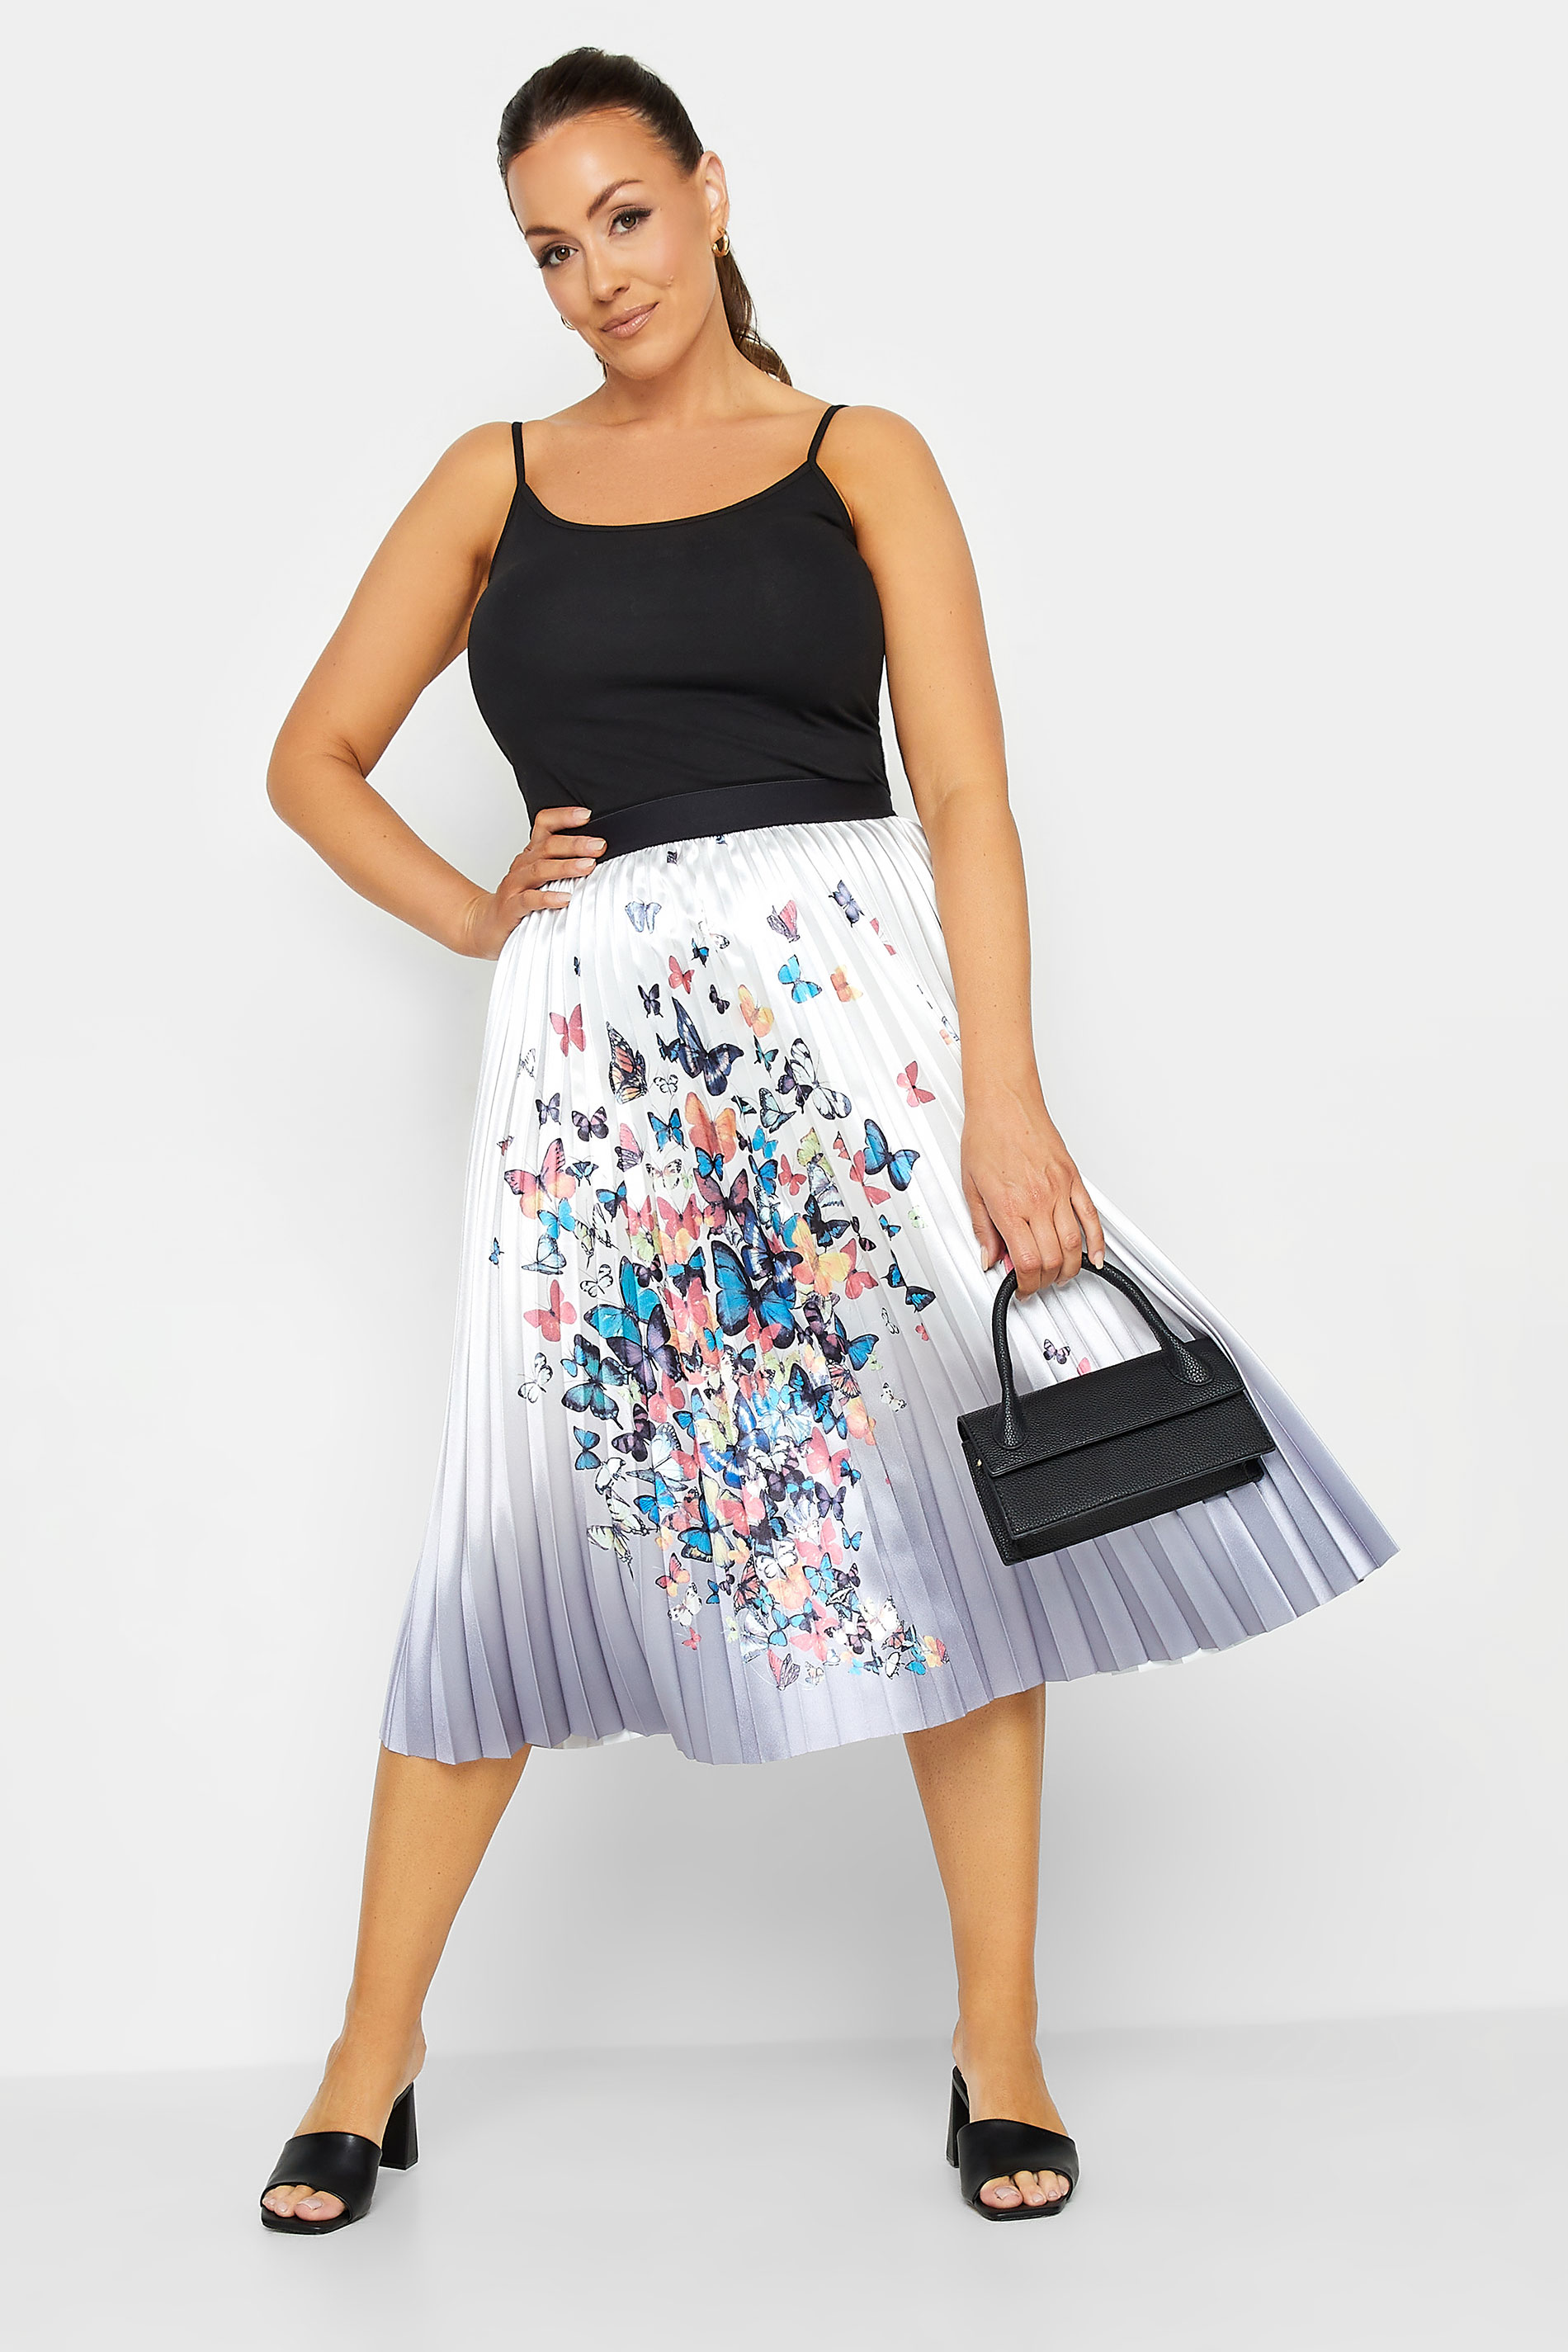 M&Co White Butterfly Print Pleated Midi Skirt | M&Co 2